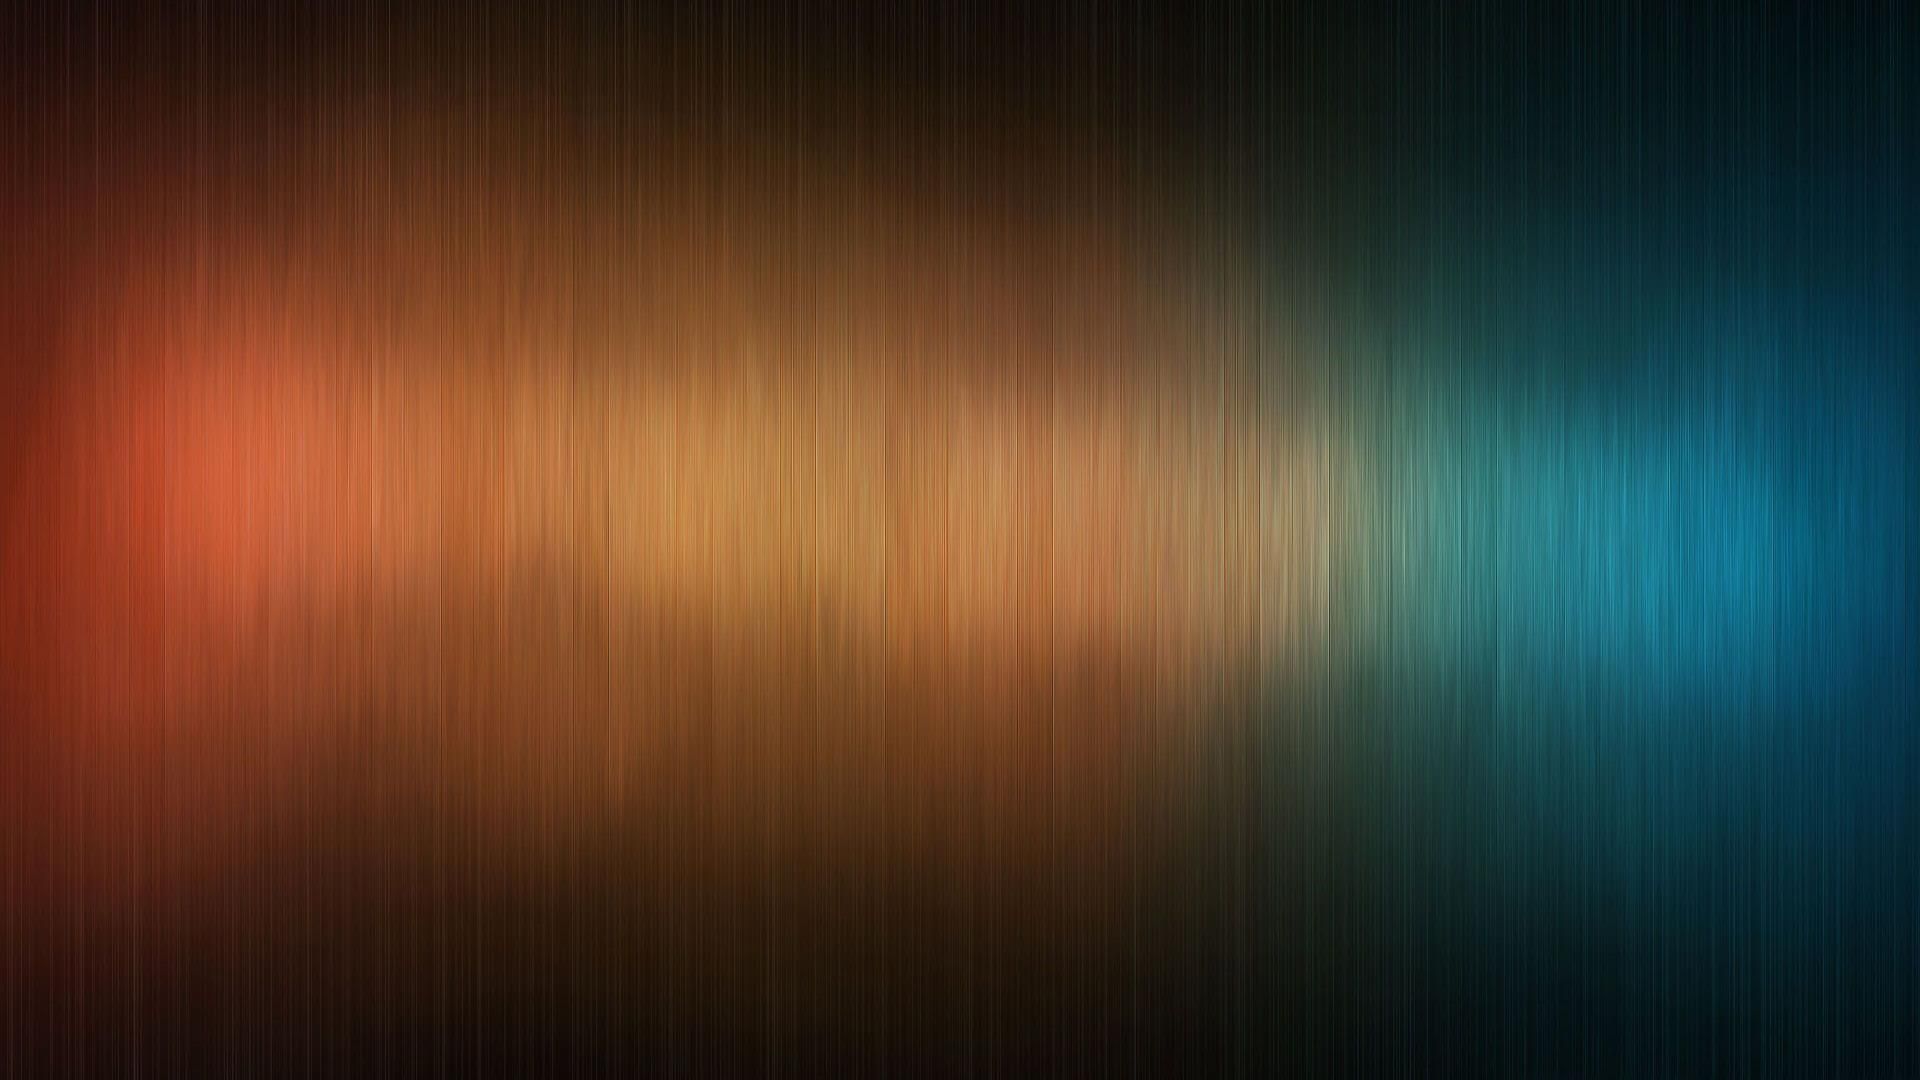 Full HD, 4K and many more resolution backgrounds